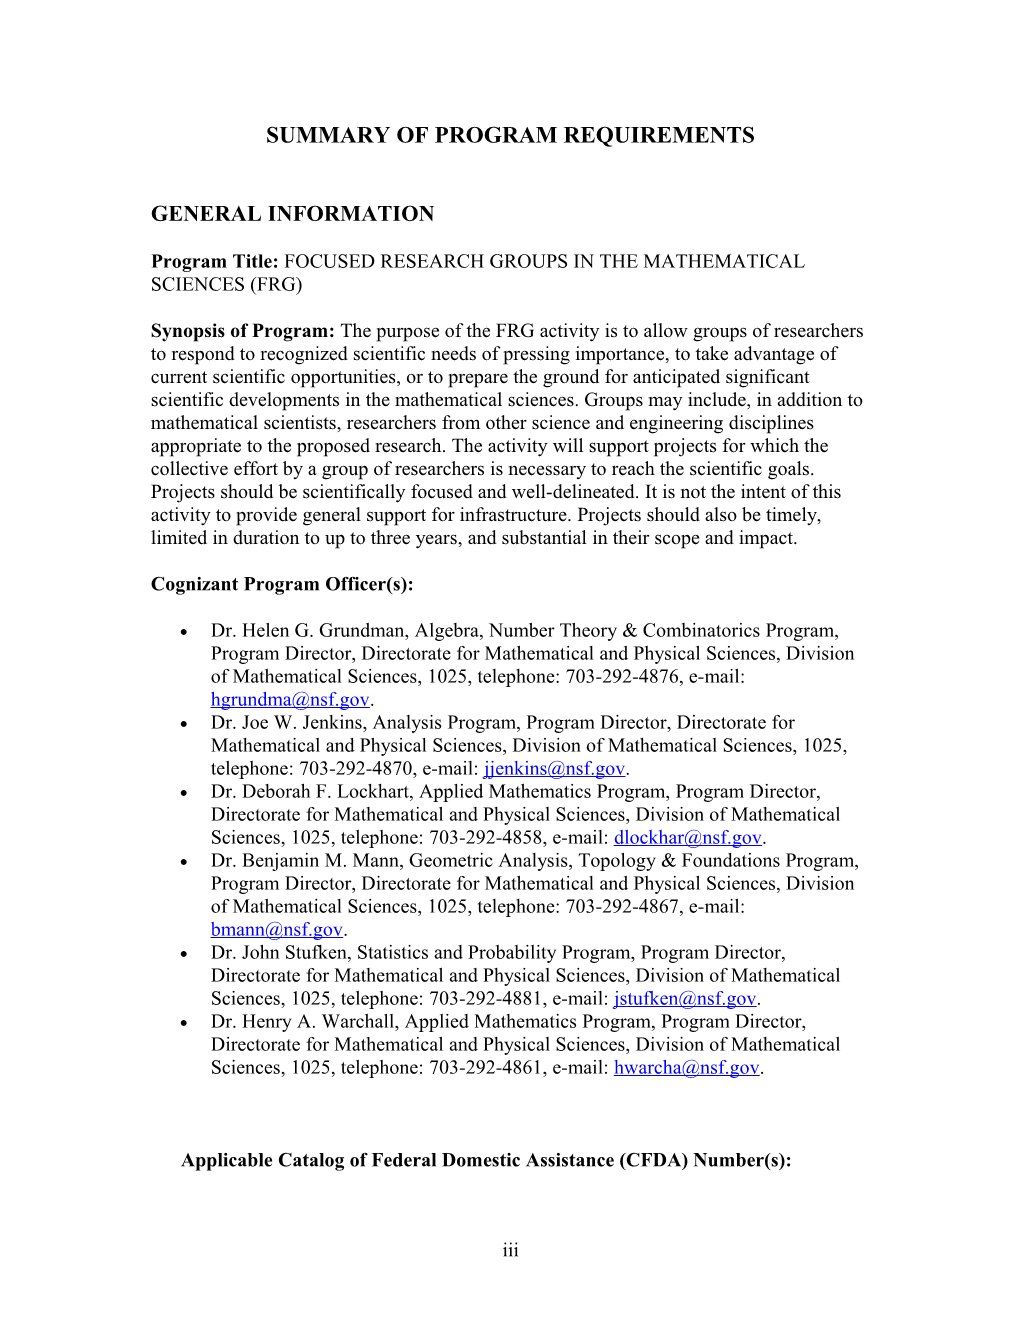 NSF Program Announcement/Solicitation: Copy (0) of FOCUSED RESEARCH GROUPS in the MATHEMATICAL